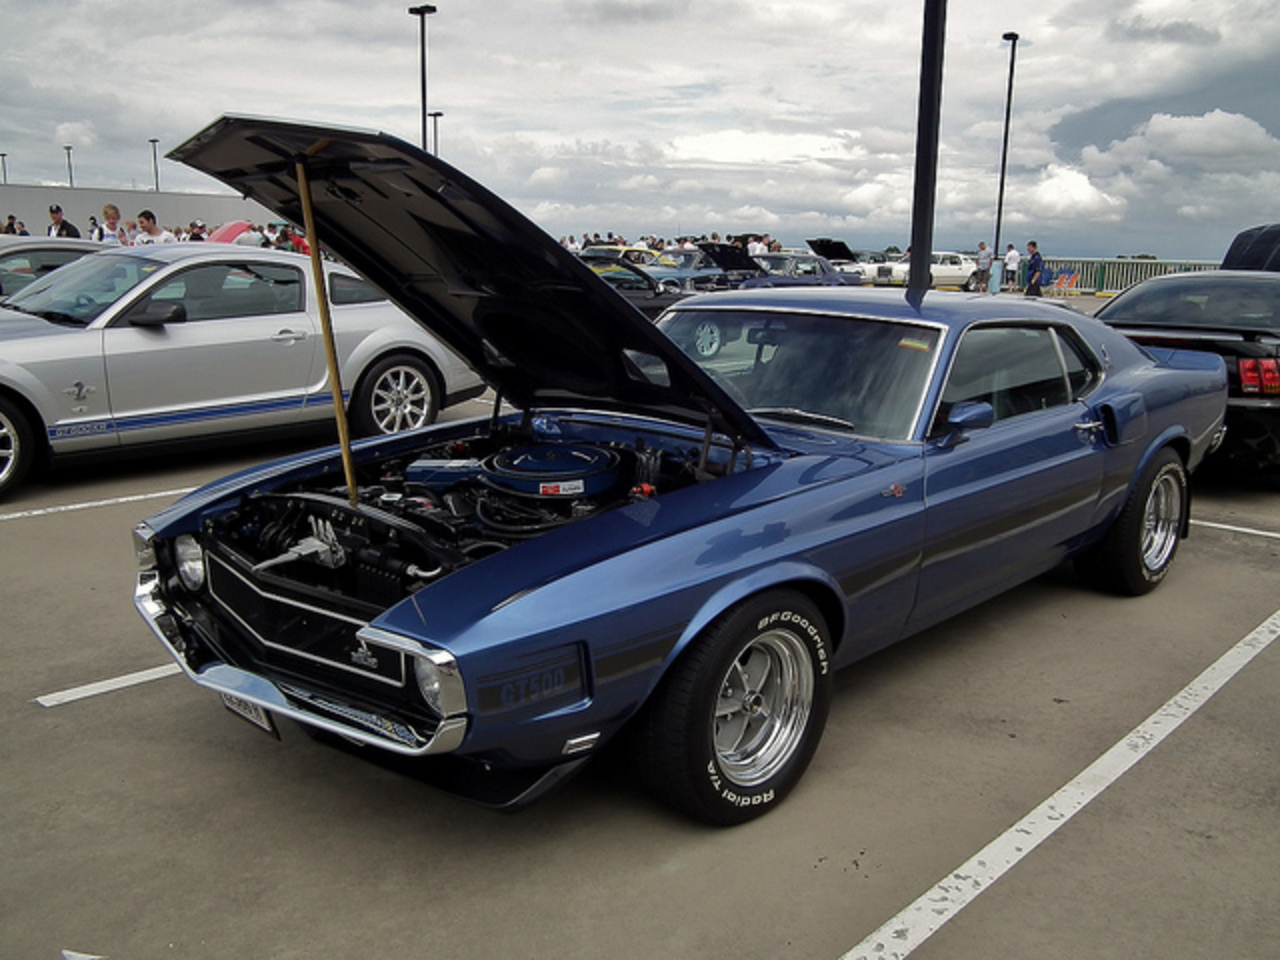 1970 Ford Mustang Shelby GT500 coupe | Flickr - Photo Sharing!